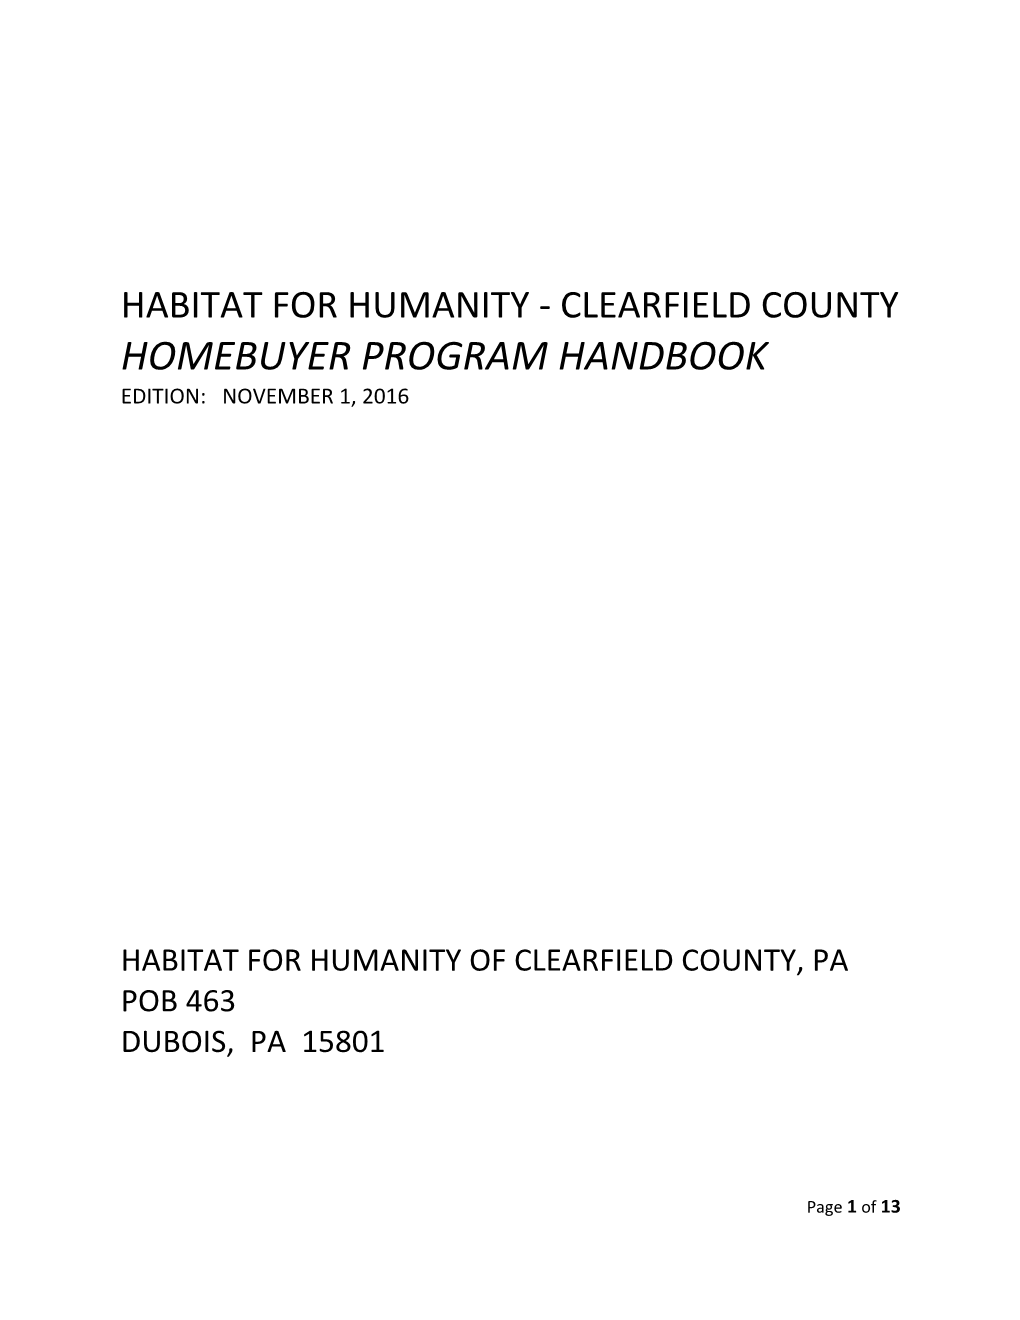 Habitat for Humanity - Clearfield County